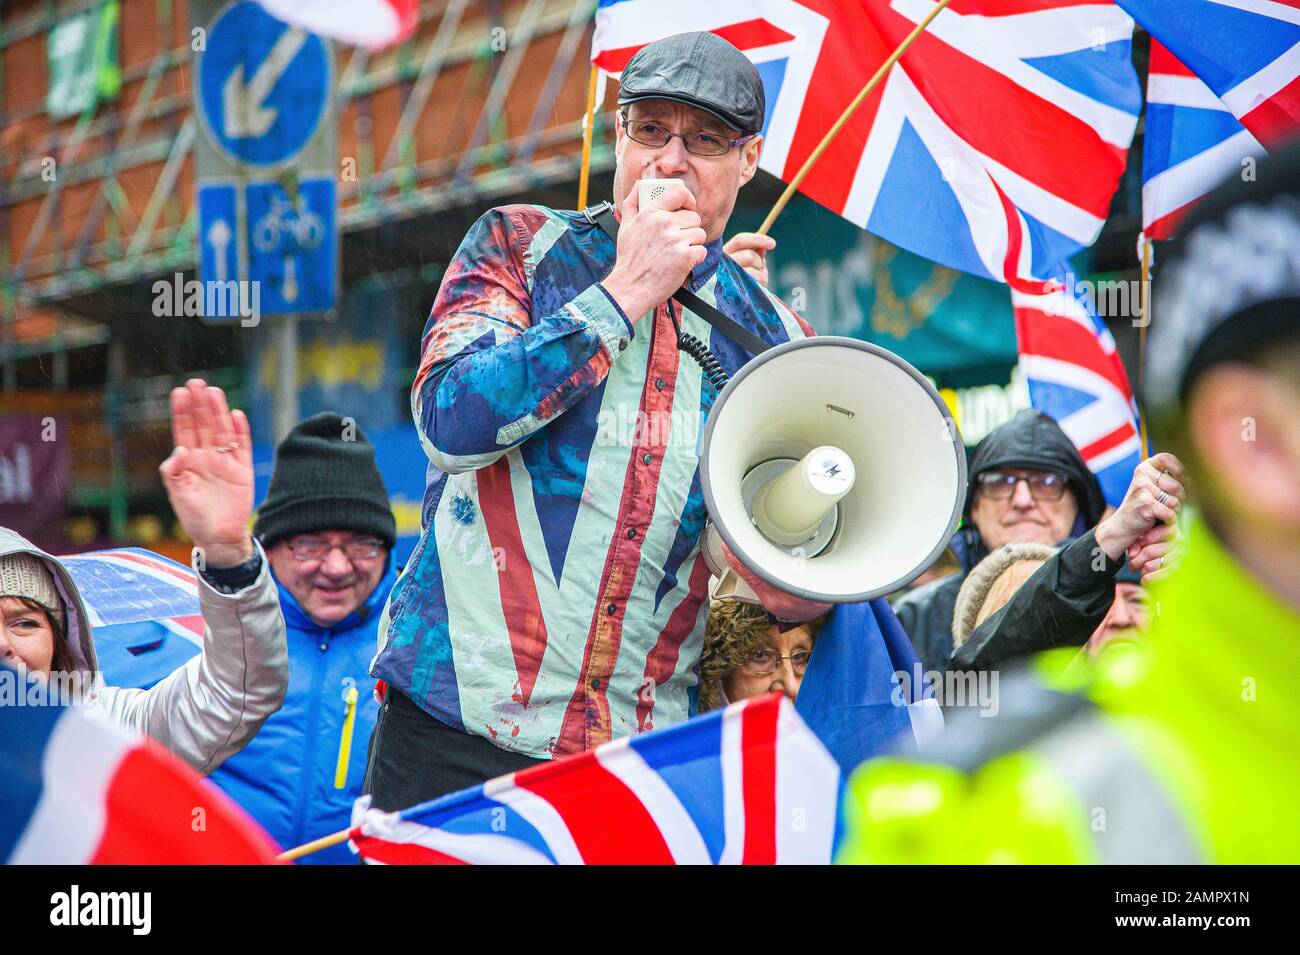 Glasgow, UK. 11th Jan, 2020. Pro-Unionist group leader Alistair McConnachie is seen shouting over his megaphone during the counter-protest.80,000 supporters came out in support of Scottish Independence following the UK General Election and the upcoming date of January 31st when the UK will leave the European Union, dragging Scotland out of it against its will, as a result the group All Under One Banner held an Emergency march through the center of Glasgow to protest against both London rule and Brexit. Credit: Stewart Kirby/SOPA Images/ZUMA Wire/Alamy Live News Stock Photo